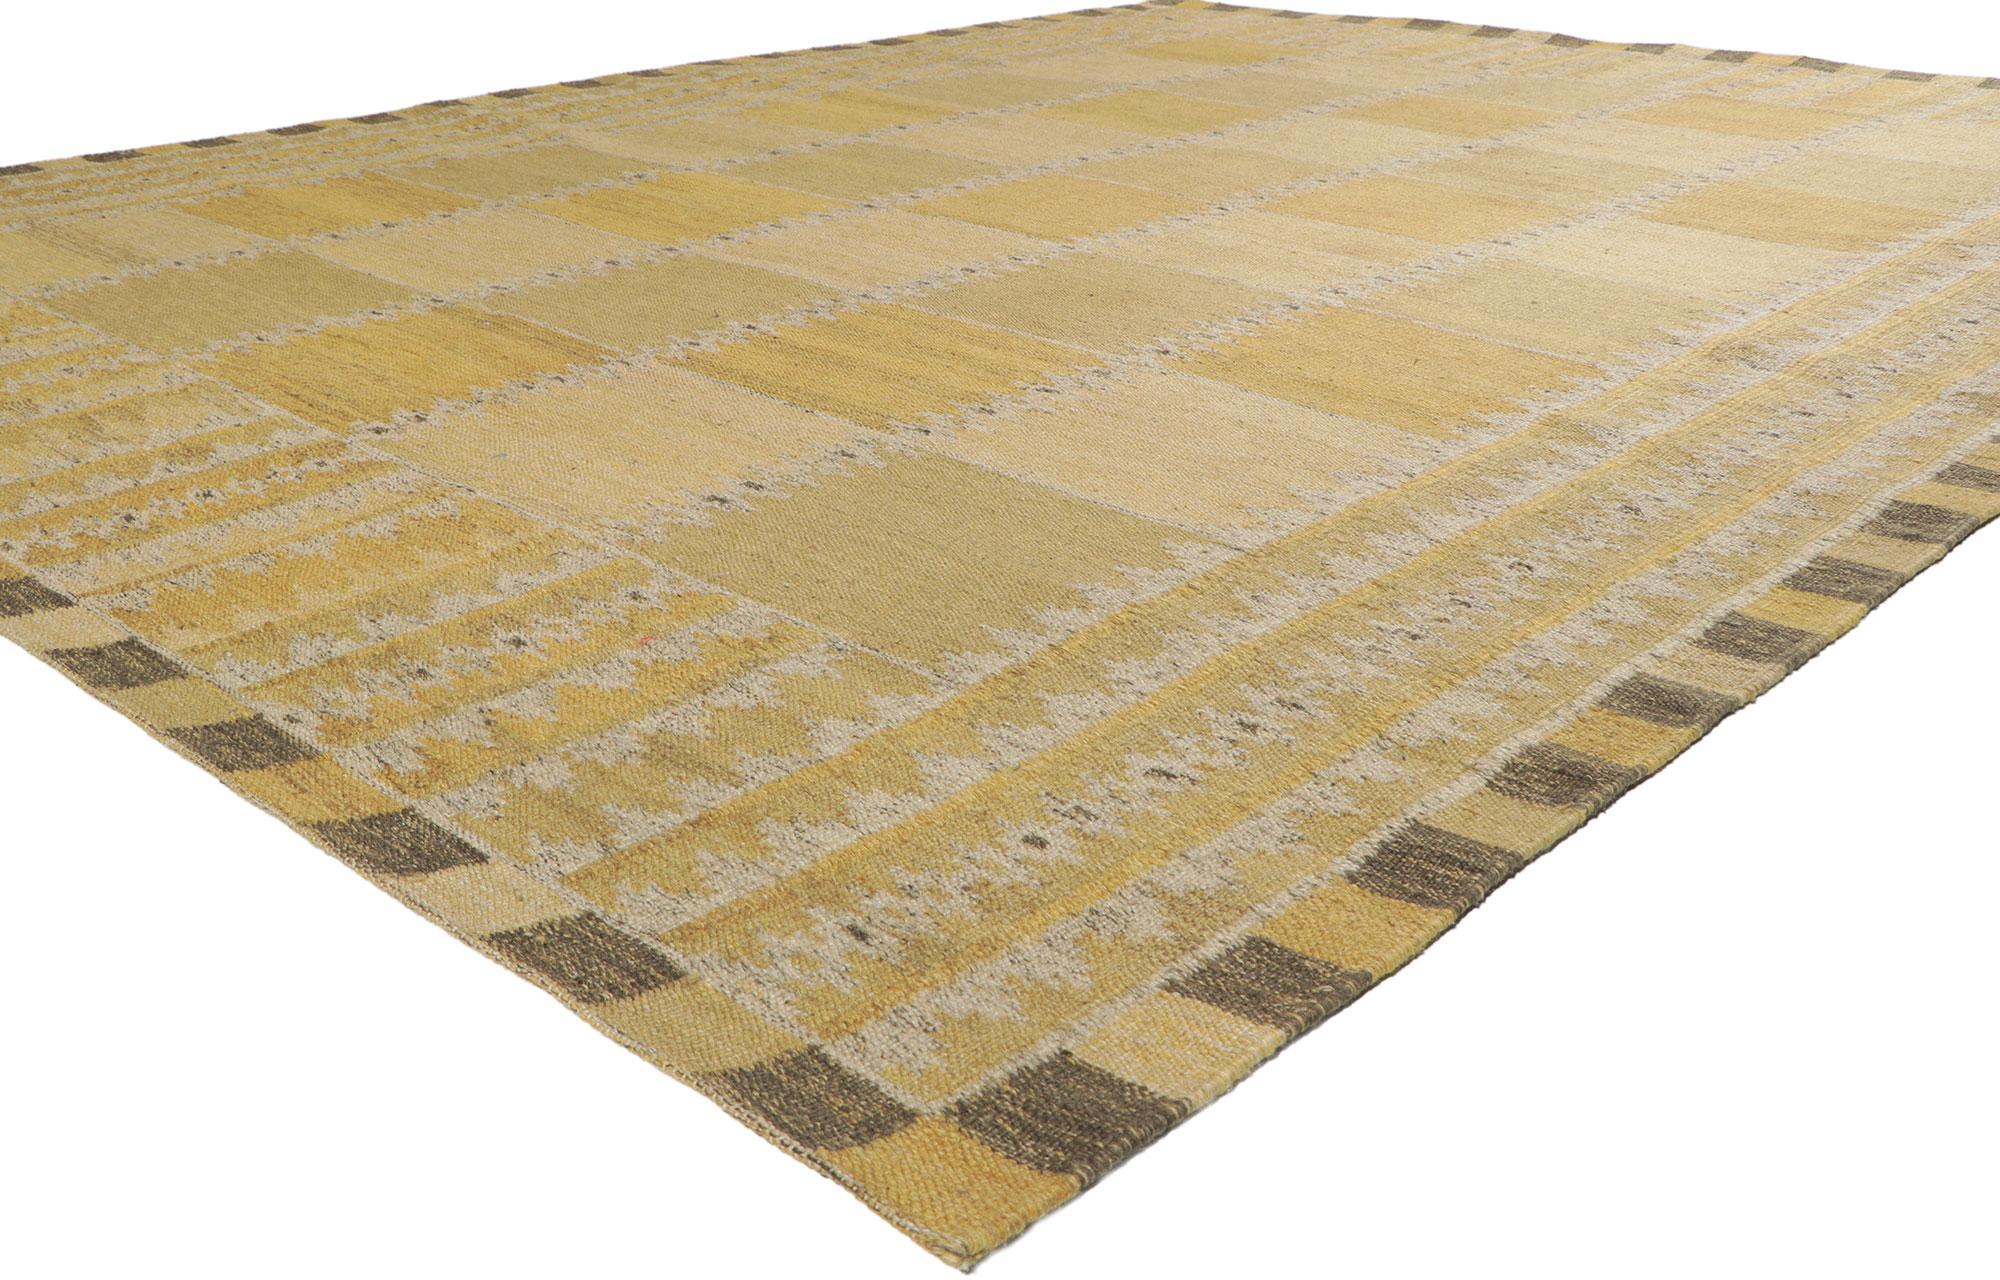 ?30801 New Swedish Marianne Richter Inspired Kilim rug 09'01 x 11'08. With its simplicity and geometric design, this hand-woven wool Swedish inspired Kilim rug provides a feeling of cozy contentment without the clutter. The abrashed golden striated